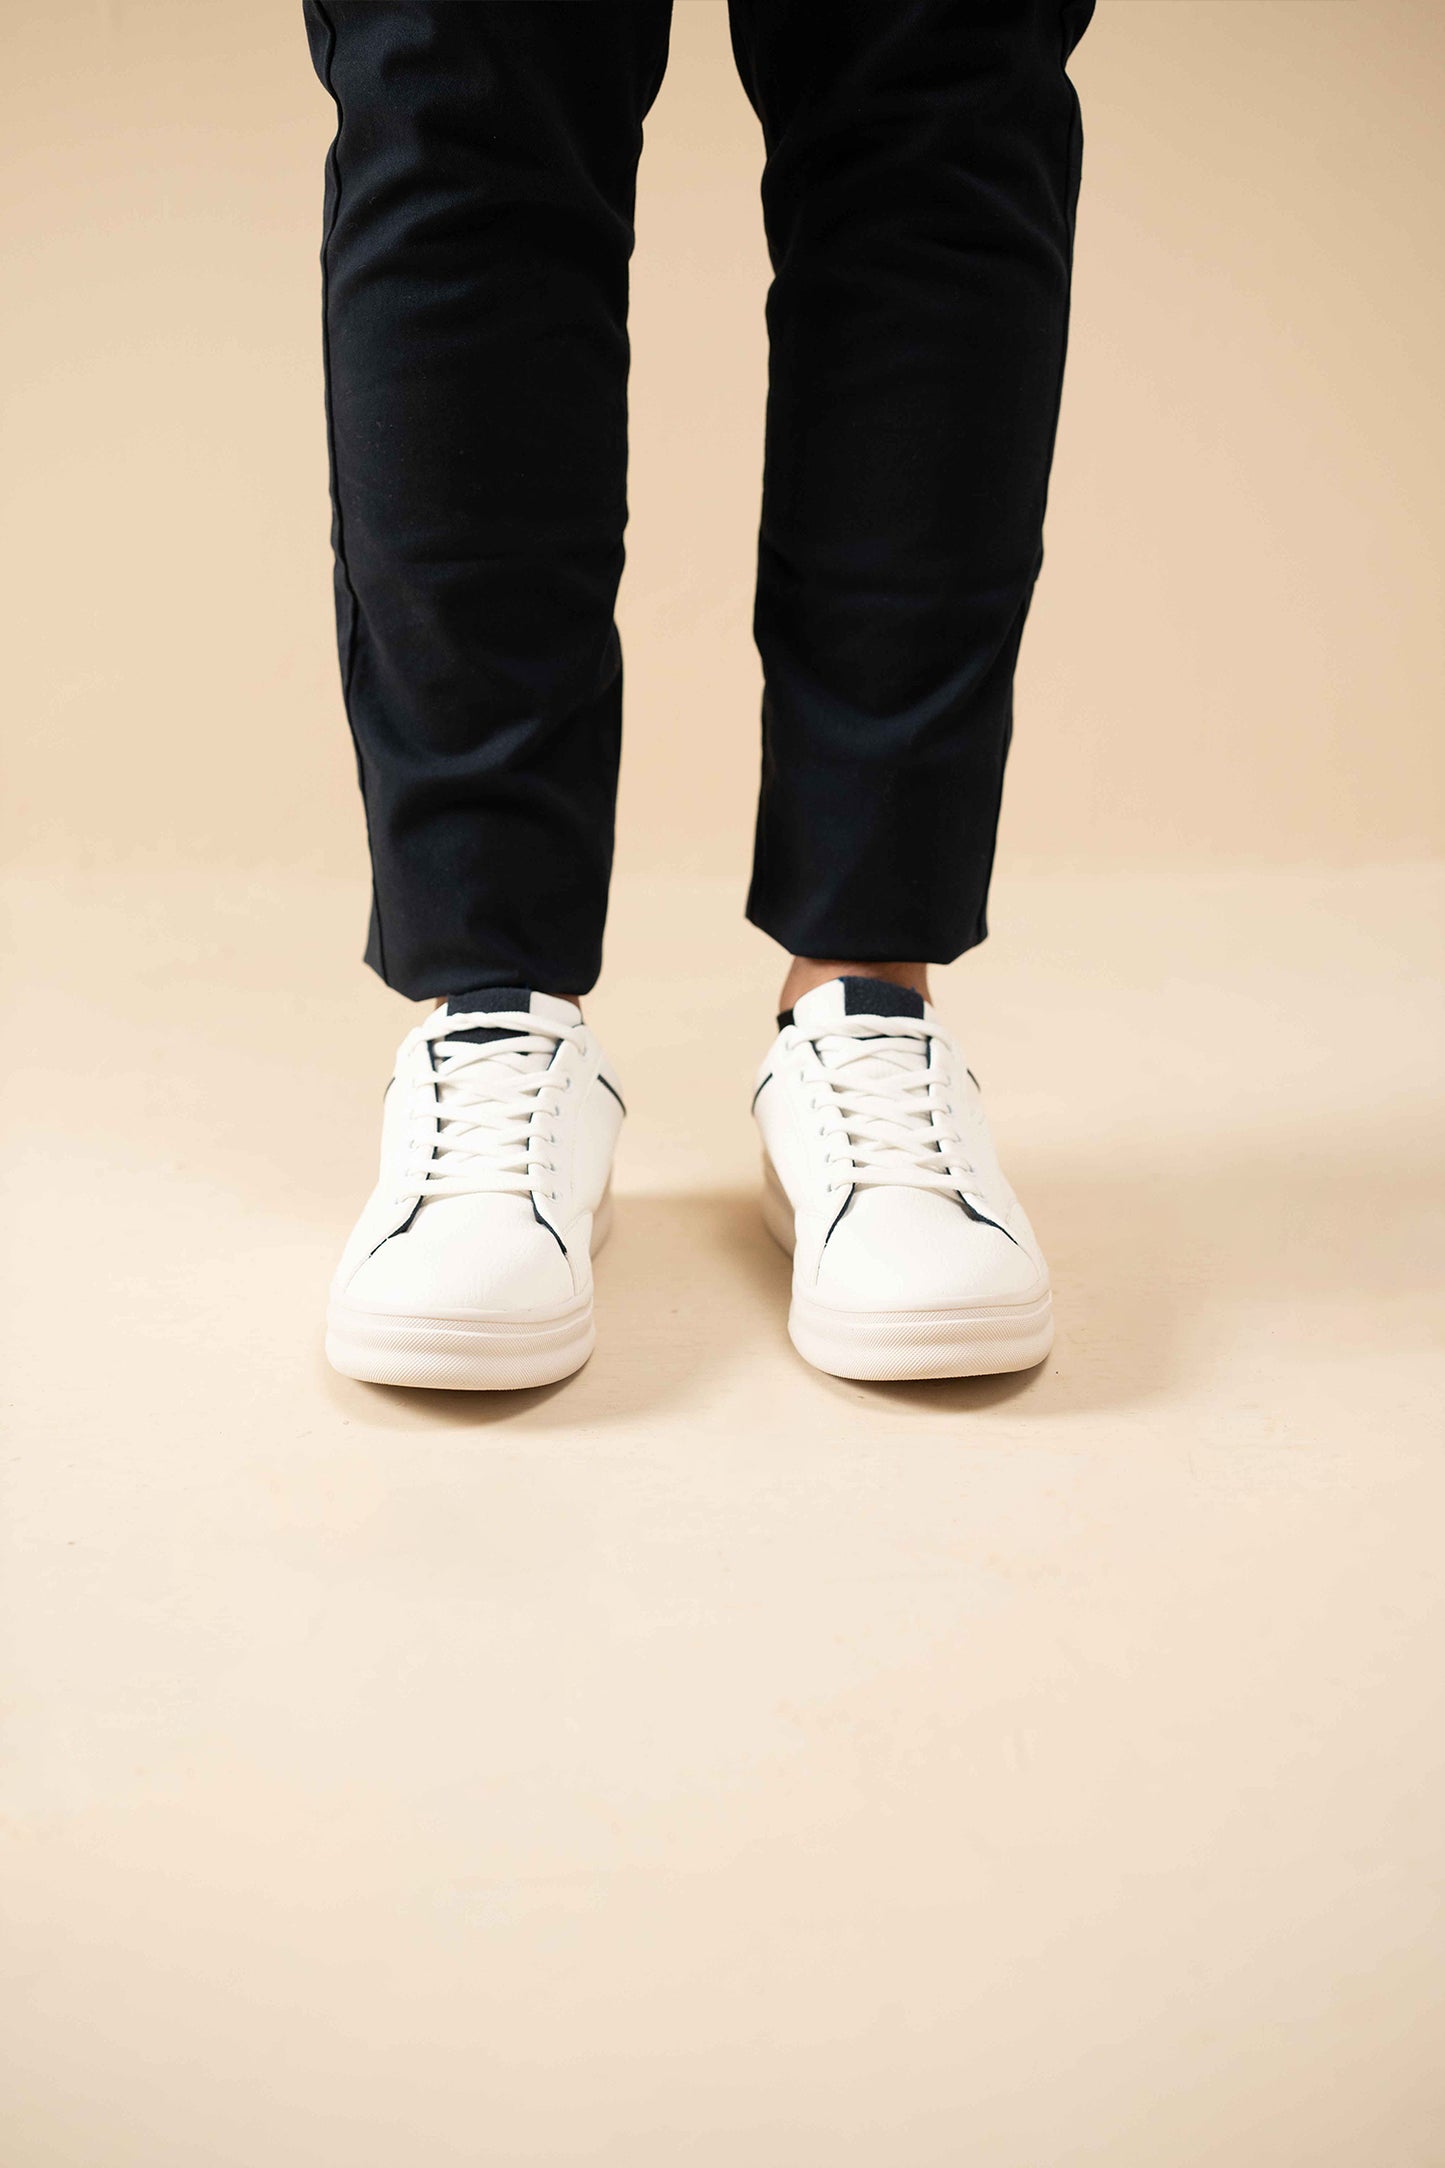 White Sneakers with Black Detail